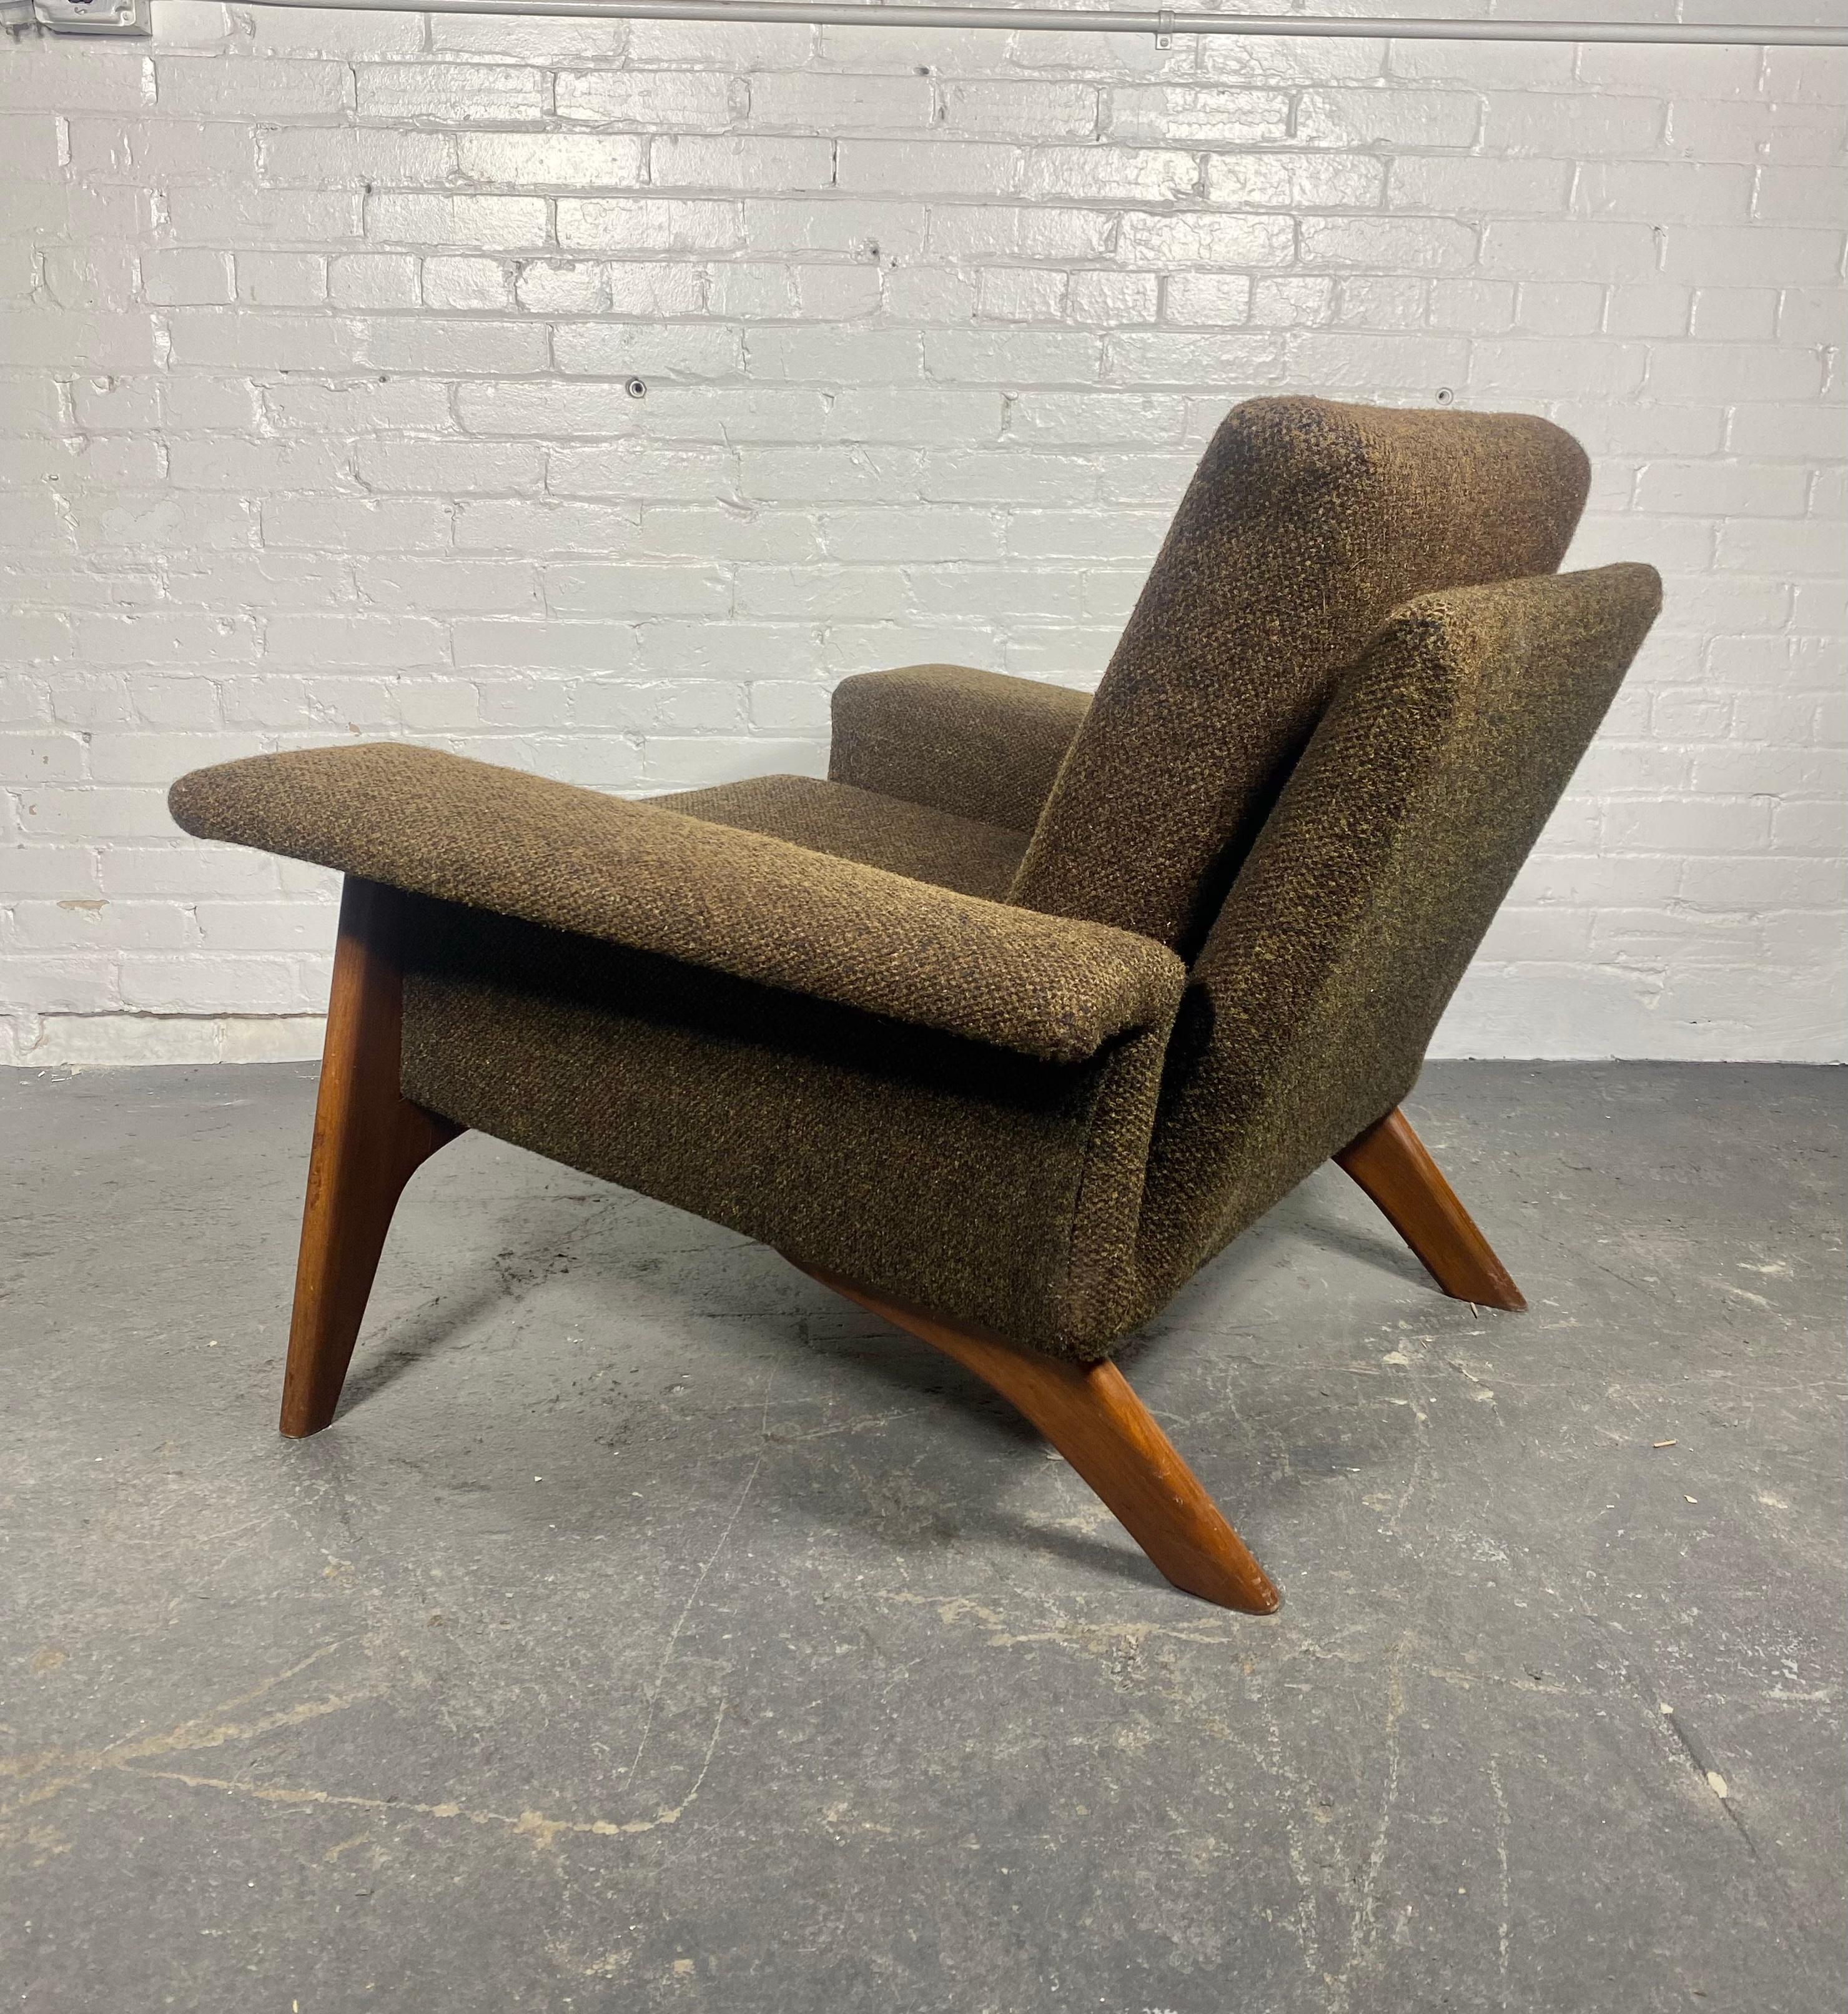 Dramatic Modernist Lounge Chair by Adrian Pearsall.Sculptural Walnut Base. 2